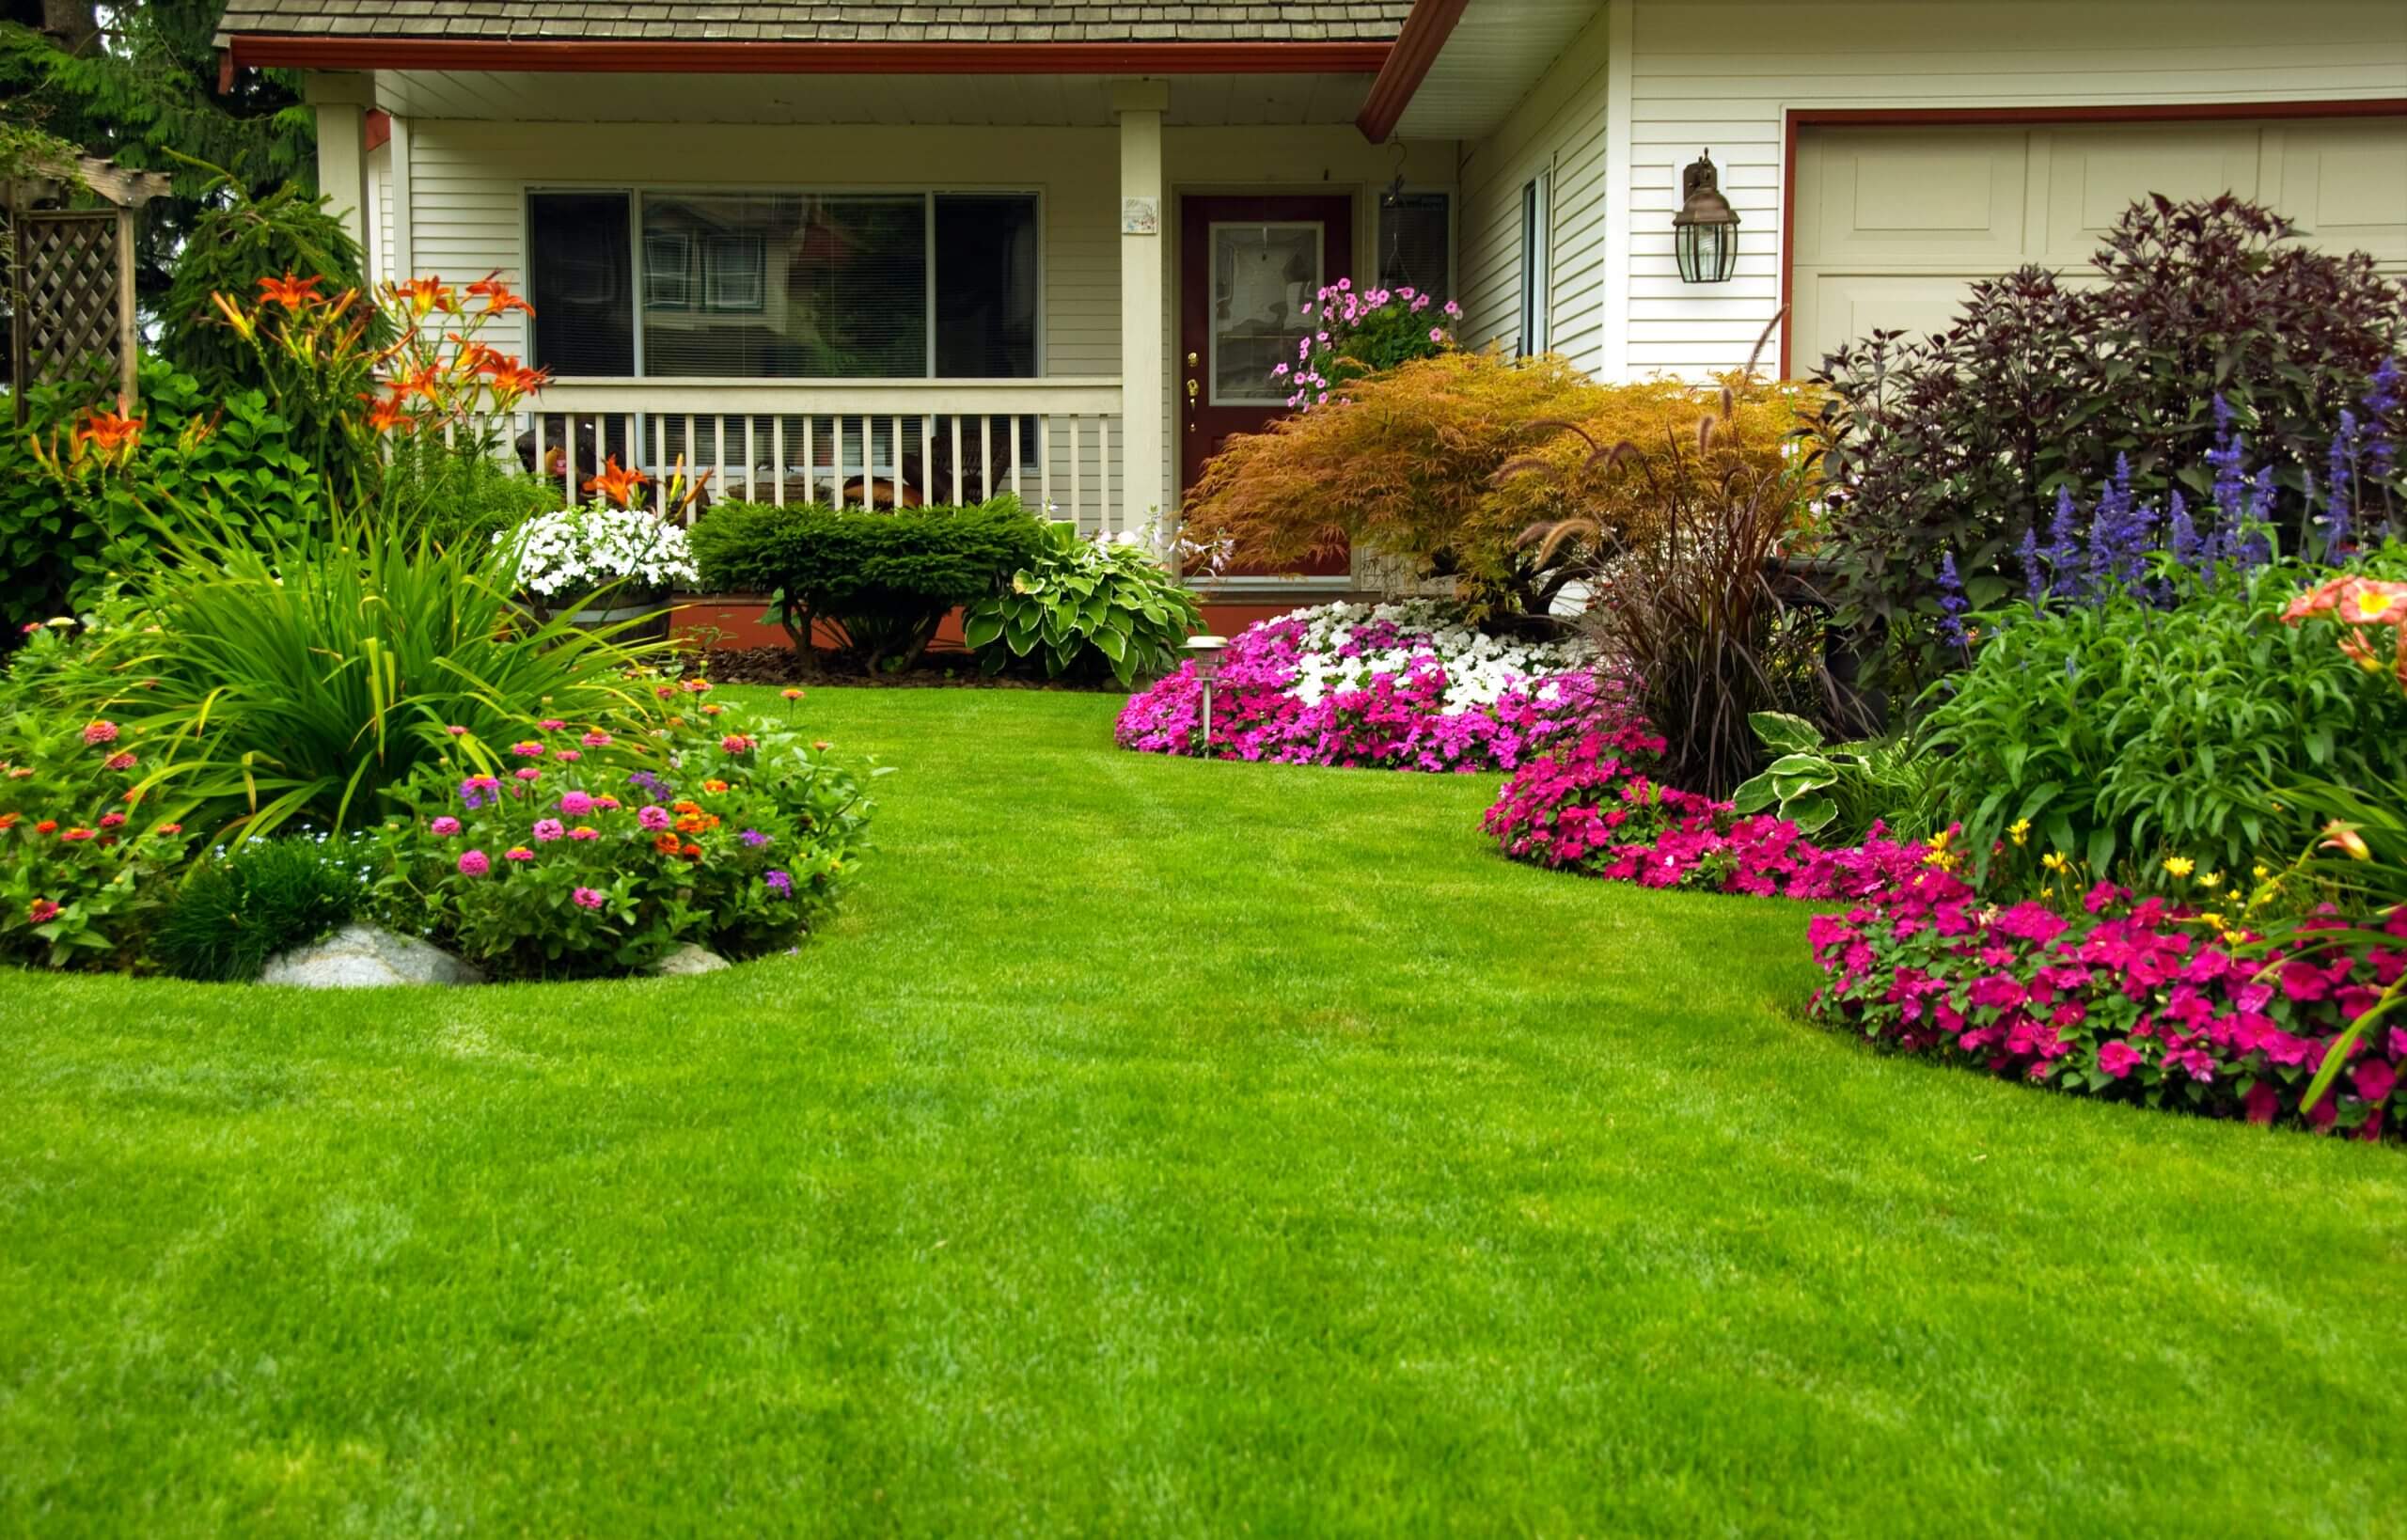 Is Decorative Rock Or Mulch Better For